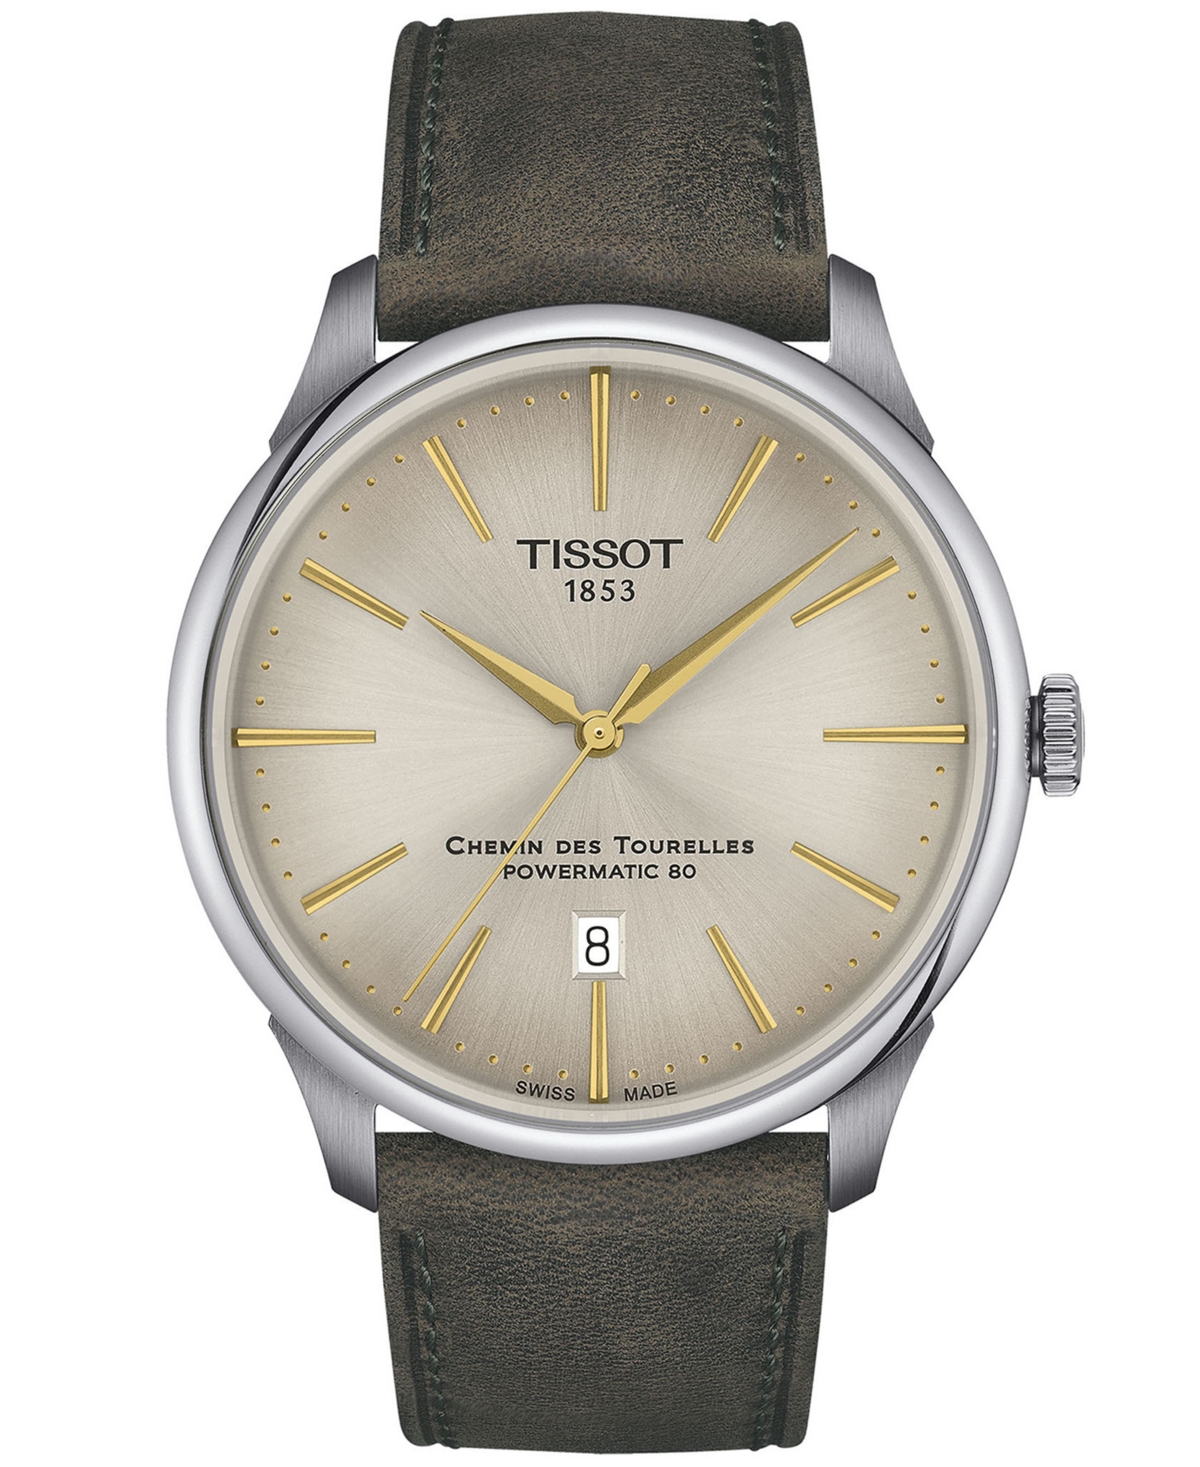 Tissot Men's Swiss Automatic Chemin Des Tourelles Powermatic 80 Green Leather Strap Watch 42mm In Gold Tone / Green / Ivory